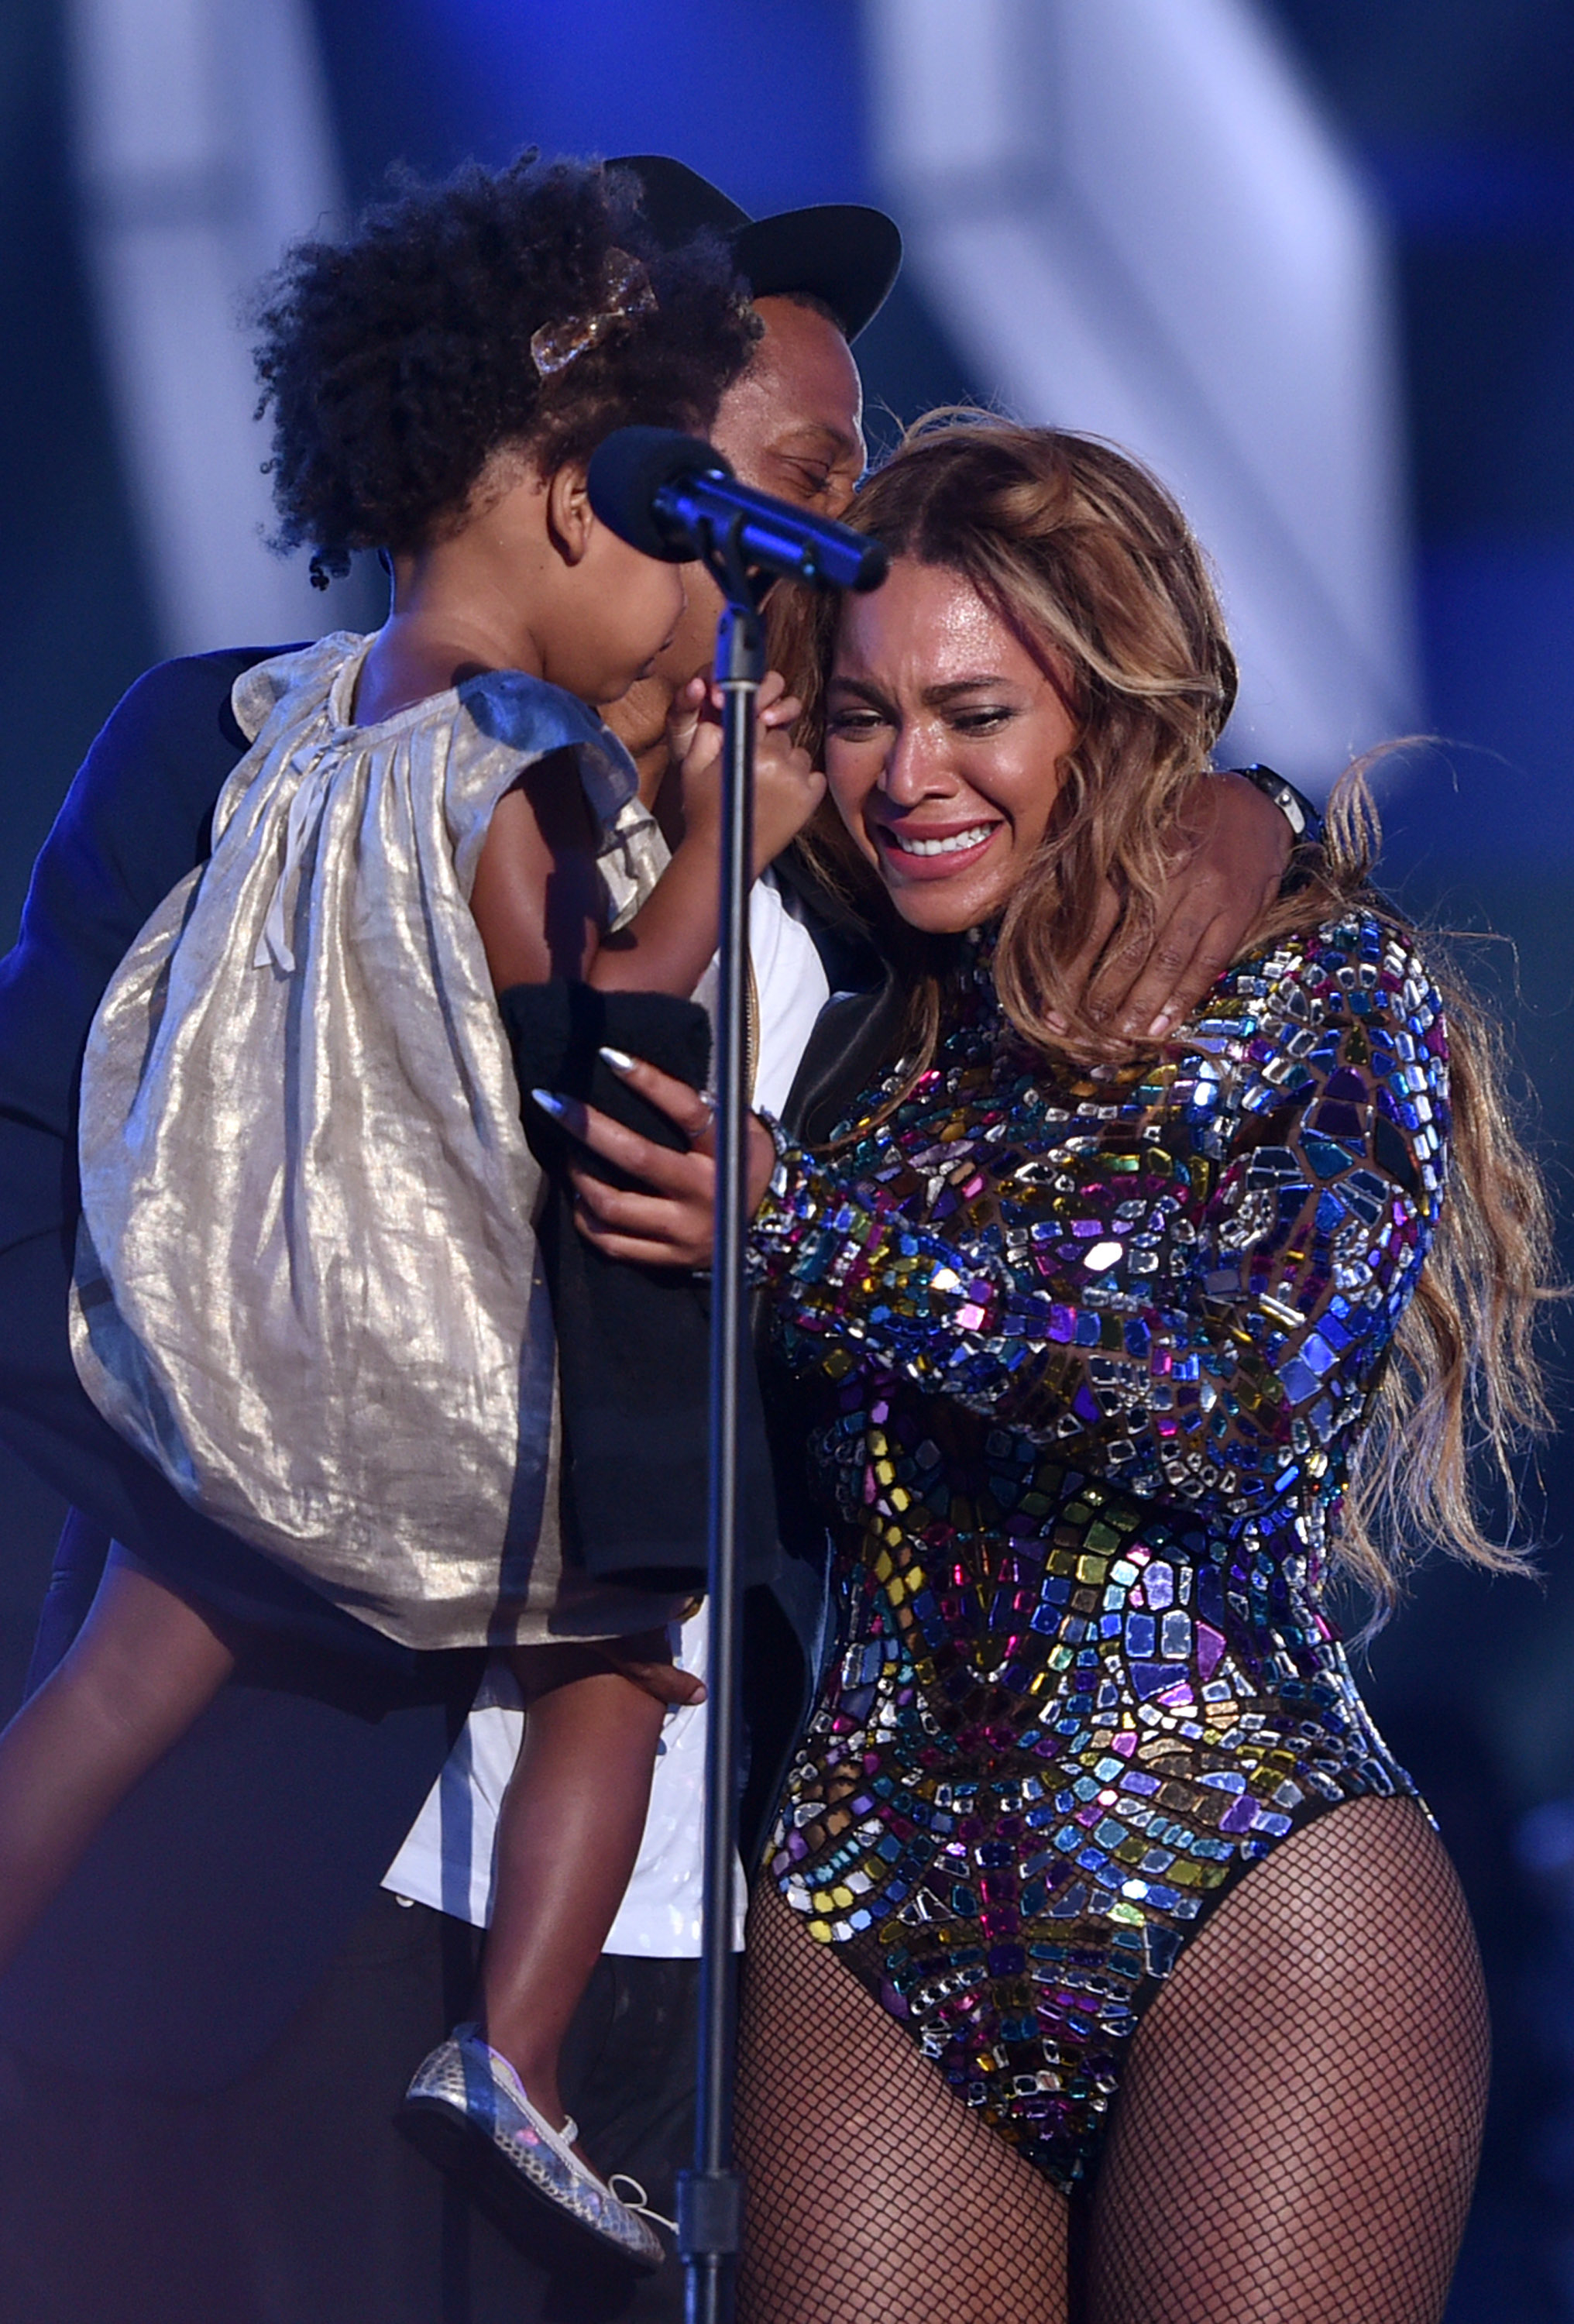 Jay-Z holding Blue Ivy, who is kissing Beyoncé on stage; Beyoncé in a sparkling bodysuit